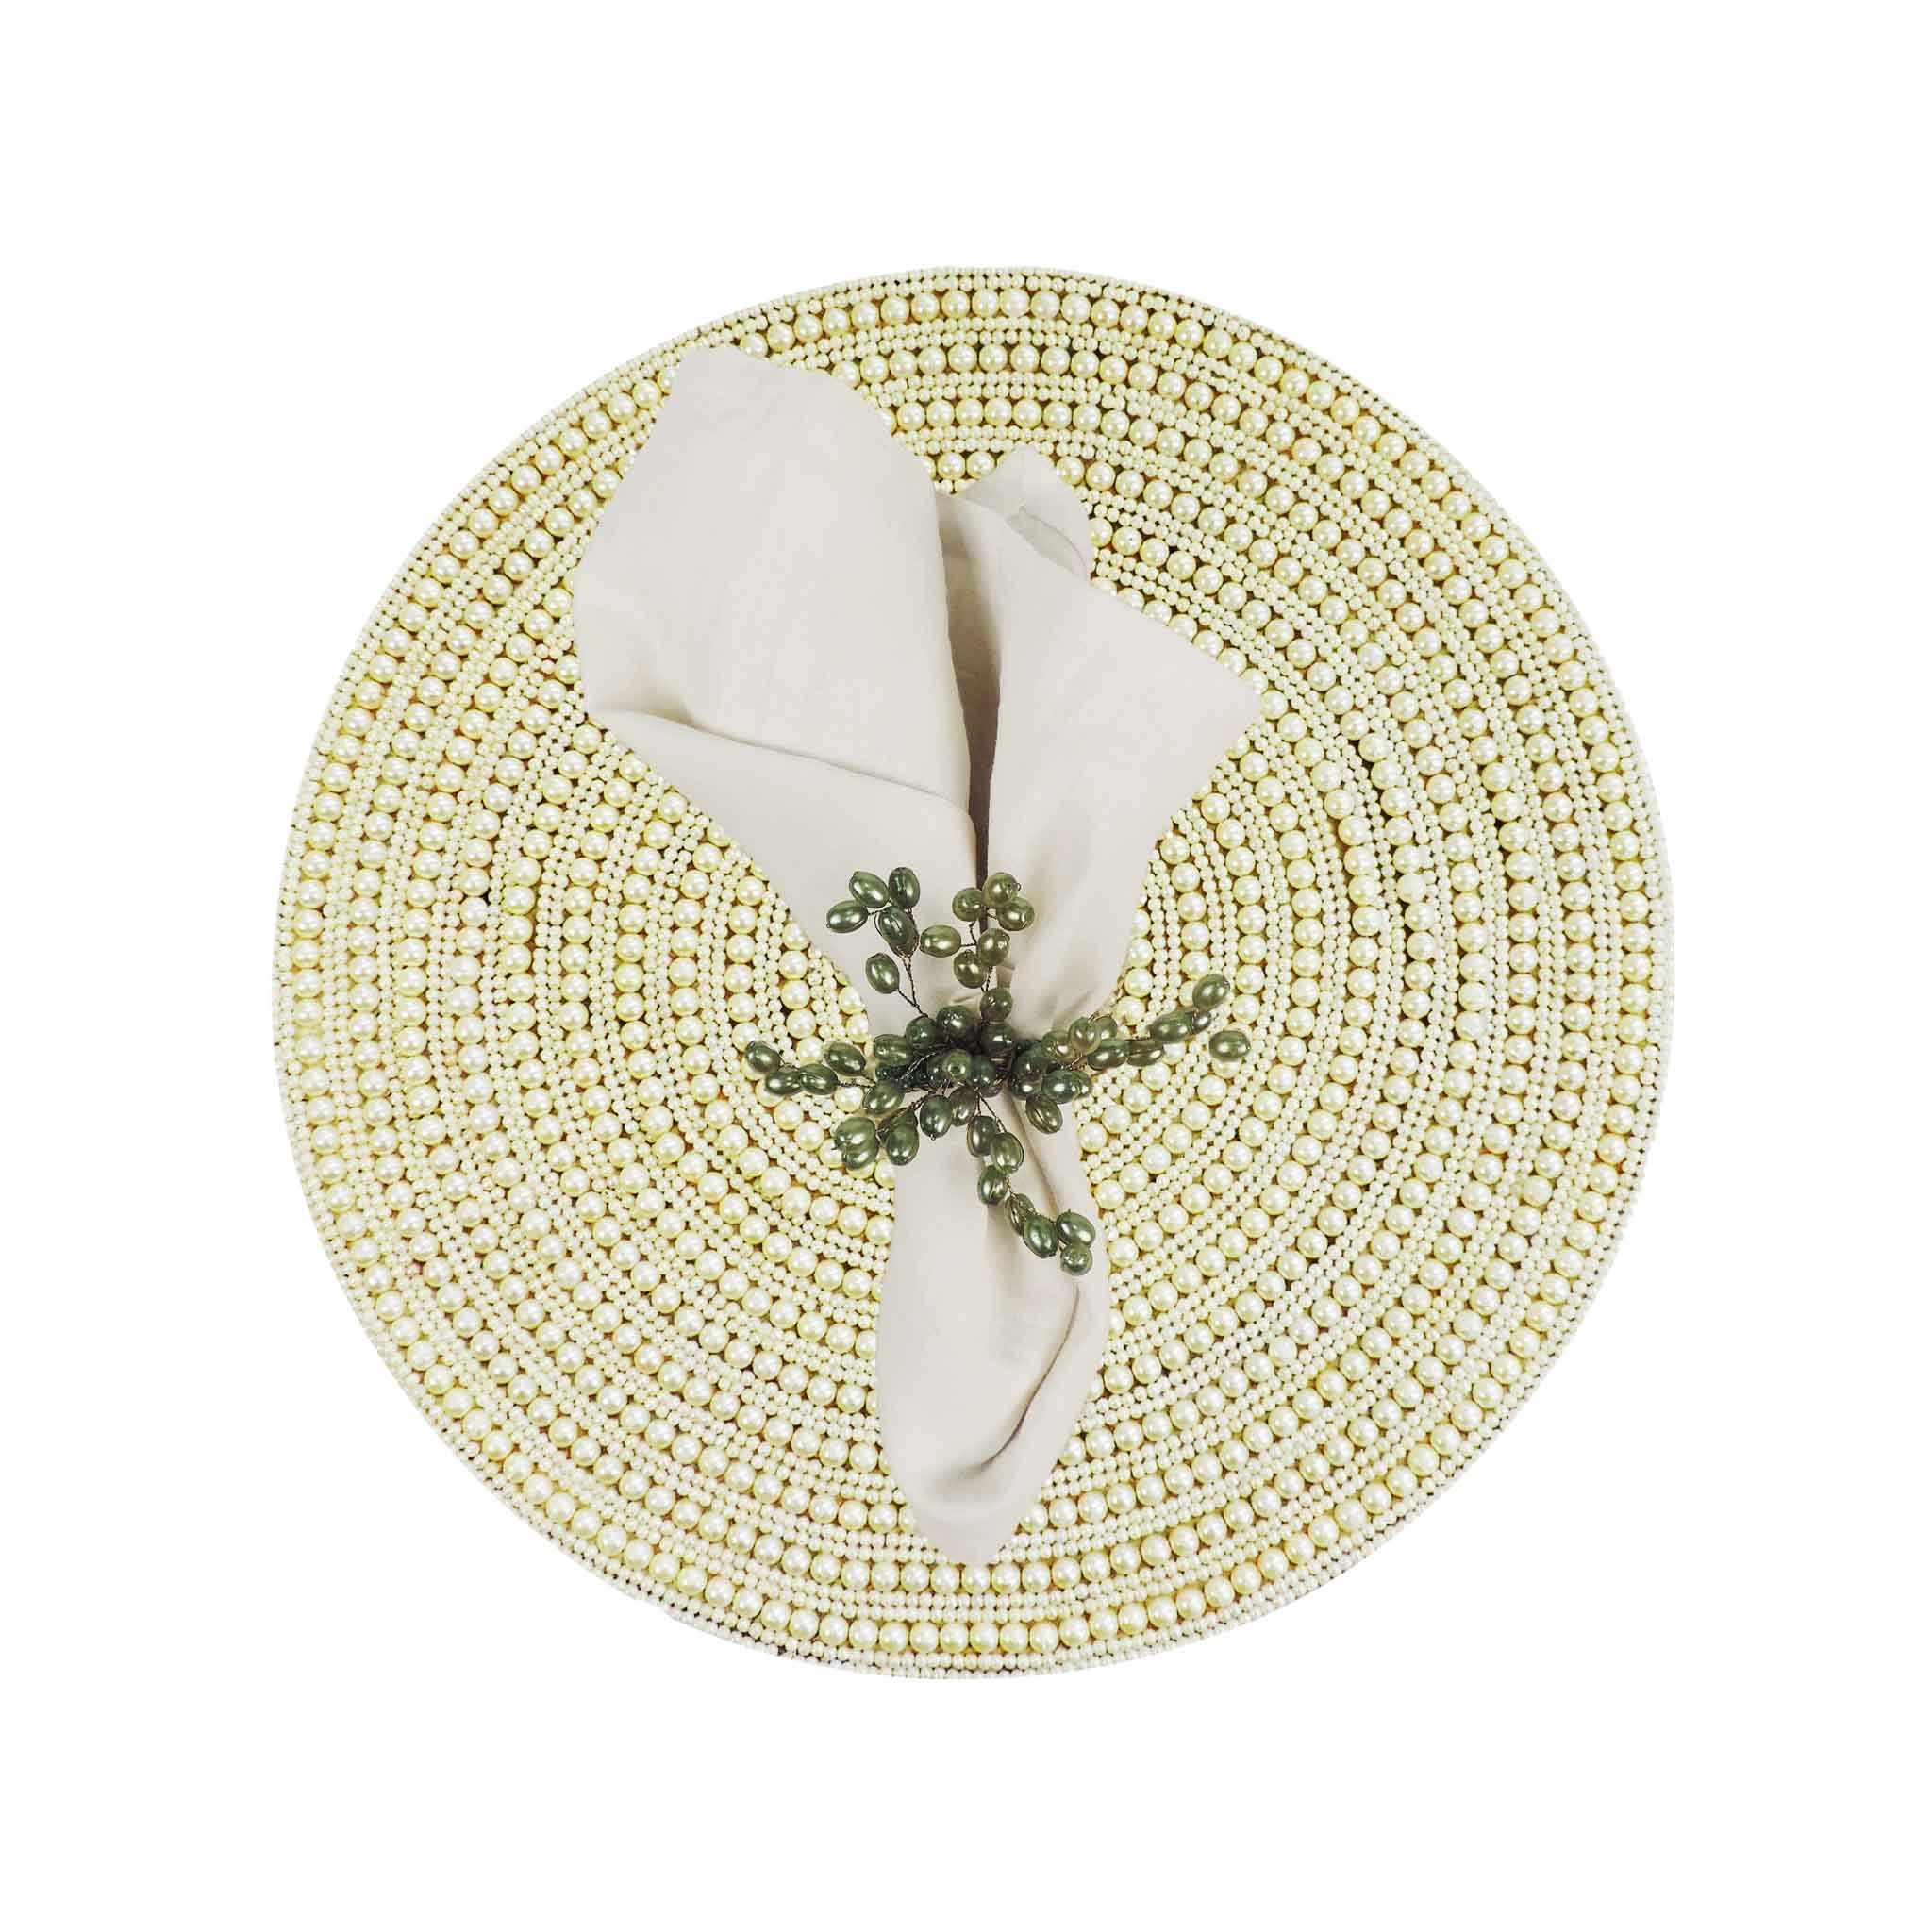 Whirl Bead Embroidered Placemat in Cream, Set of 2/4